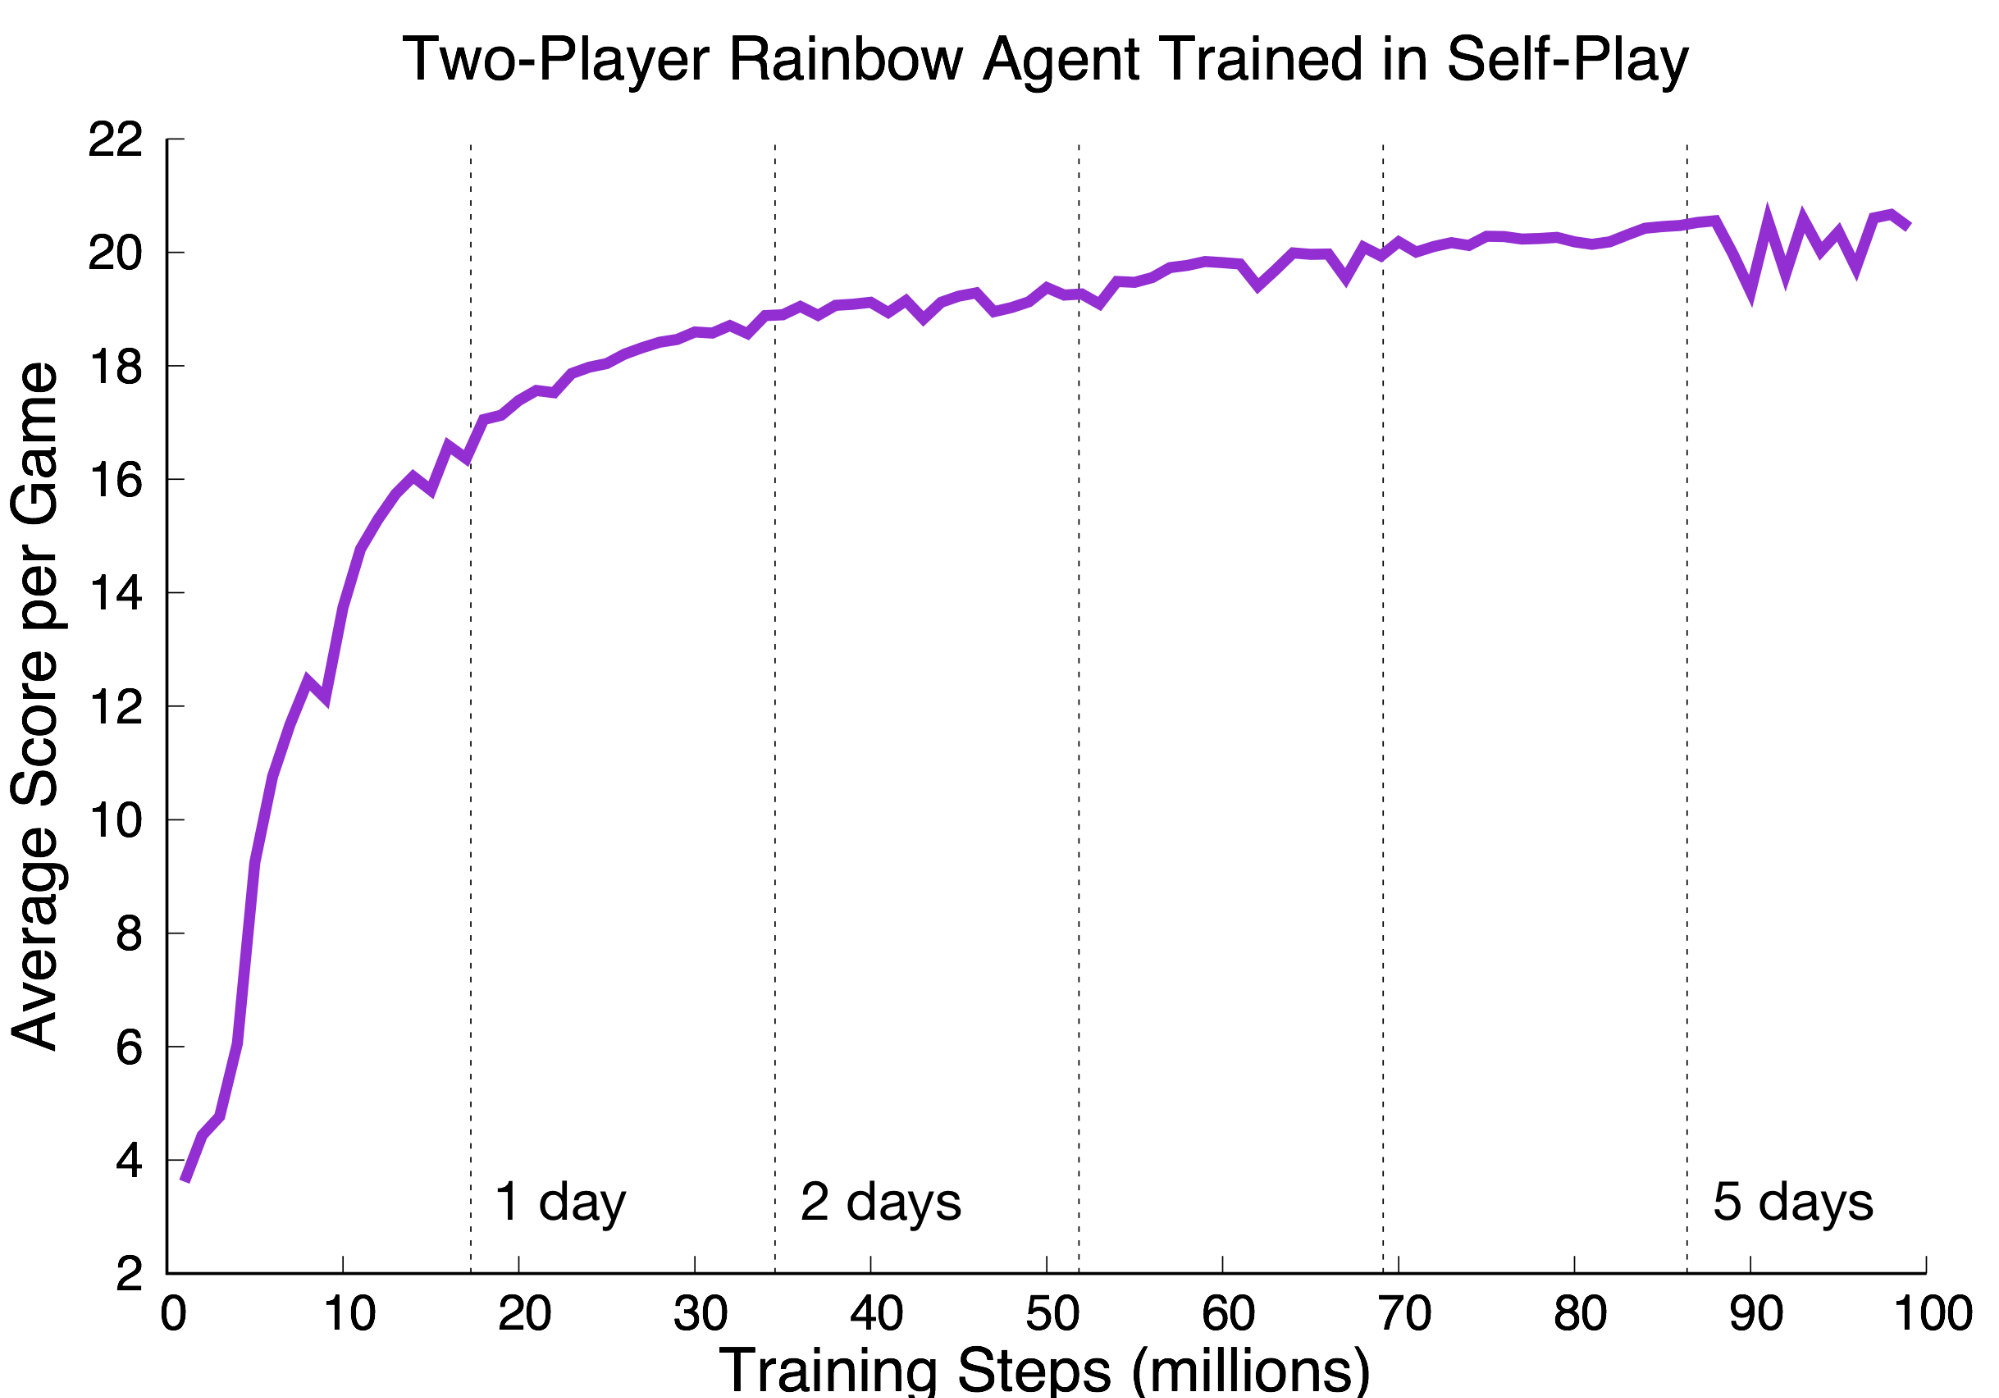 Sample learning curve for the provided 2-player Rainbow agent